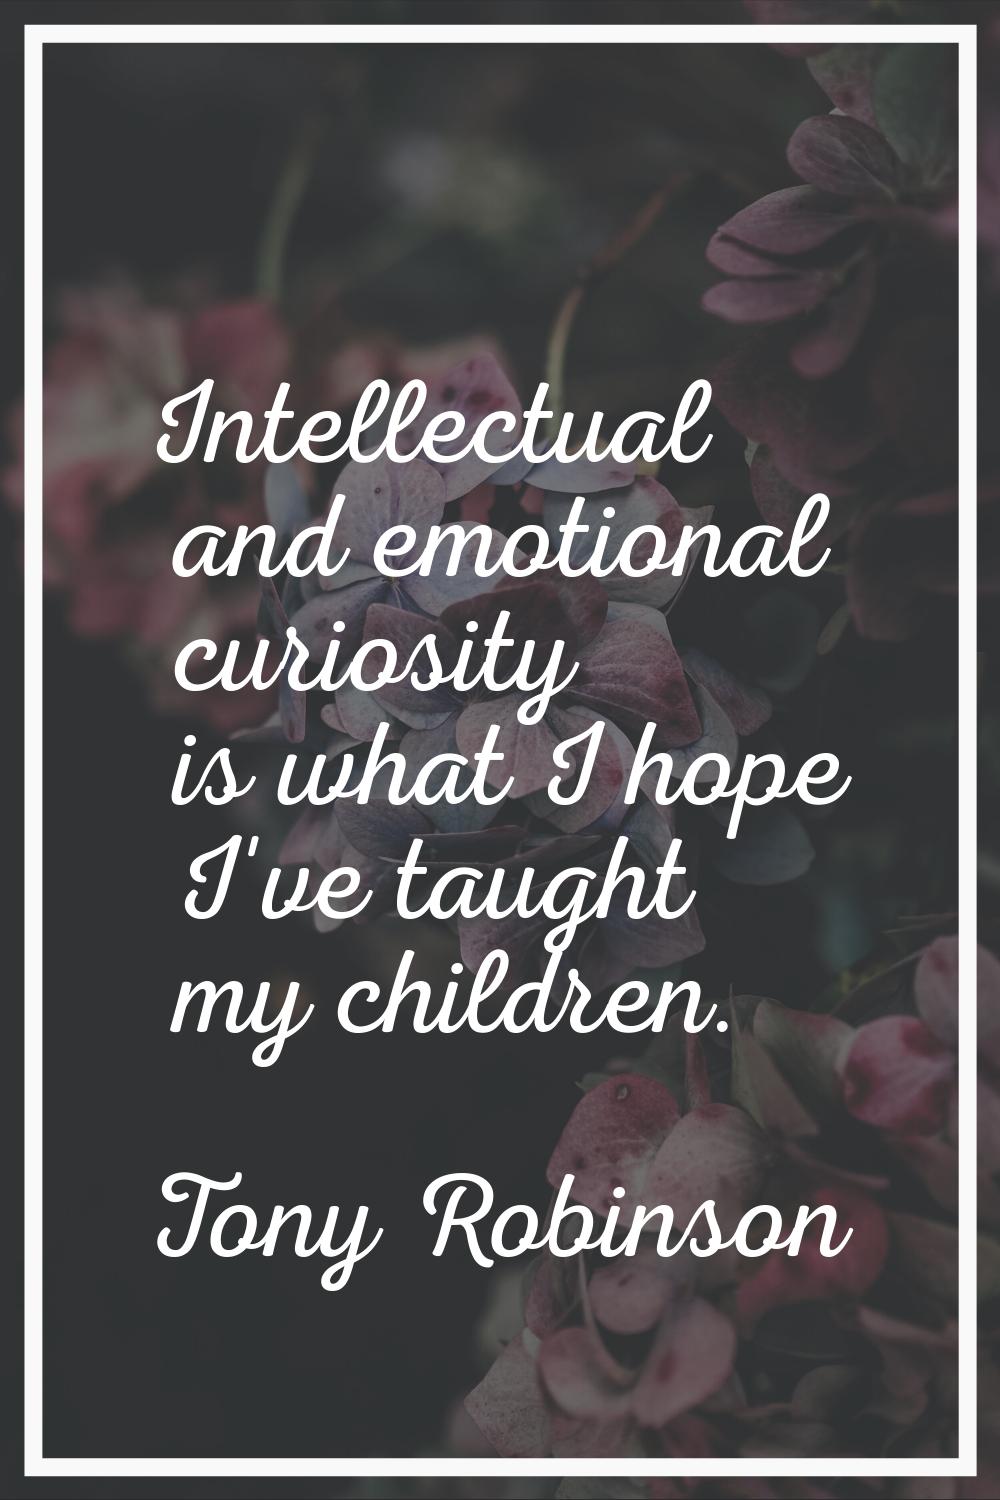 Intellectual and emotional curiosity is what I hope I've taught my children.